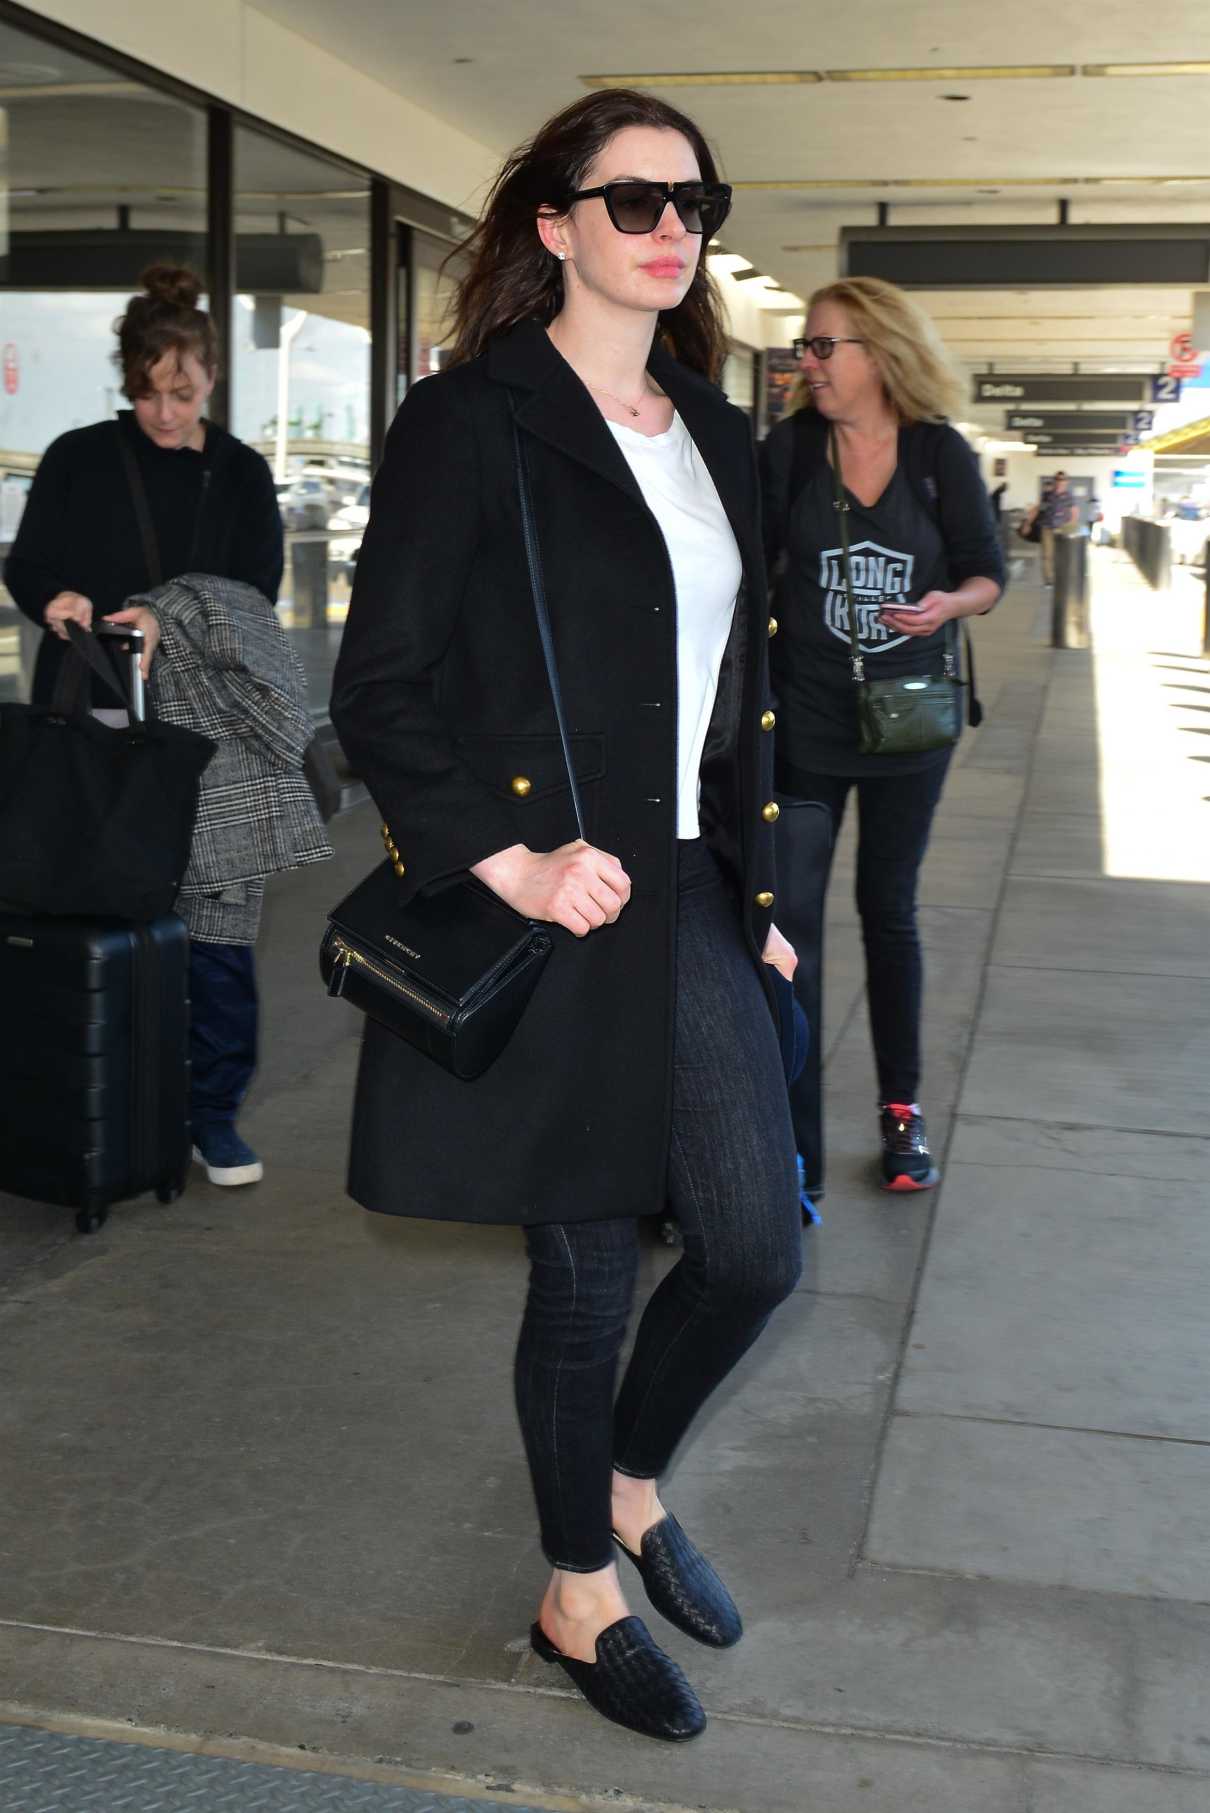 Anne Hathaway in a Black Coat Arrives at LAX Airport in LA 04/03/2019-2 ...